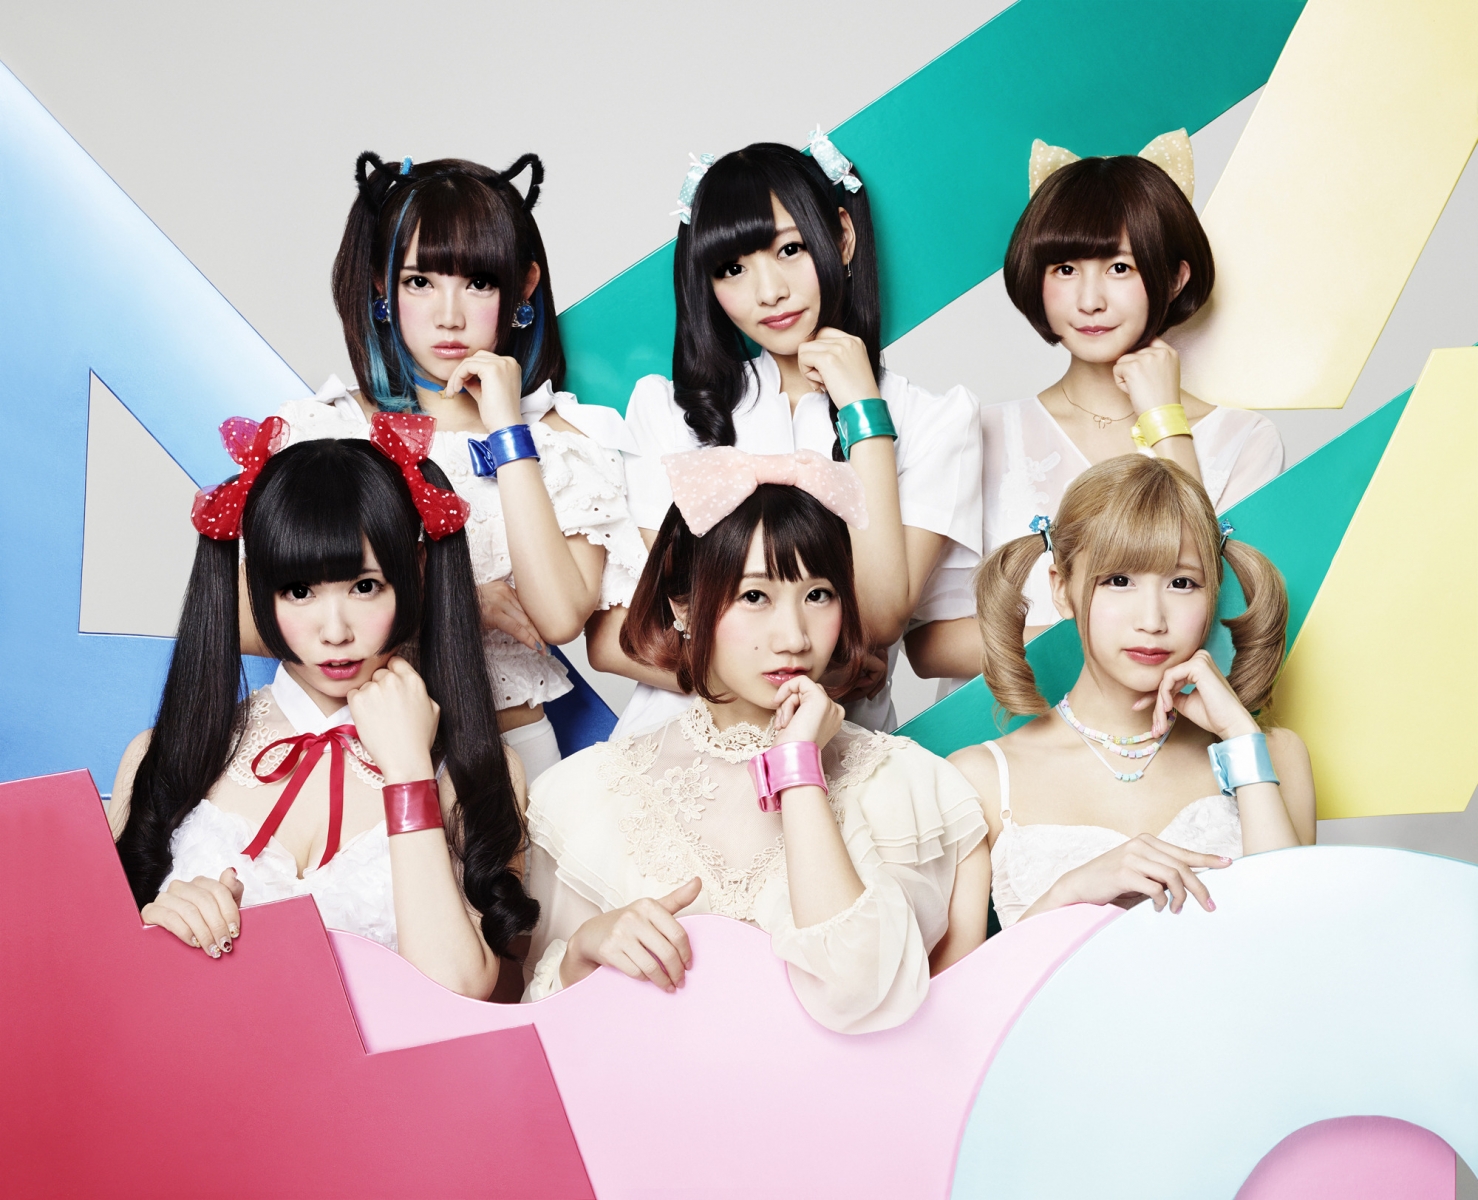 Bandjanaimon! Take You on a Date in the New Version MV for “Chocolat Love”!